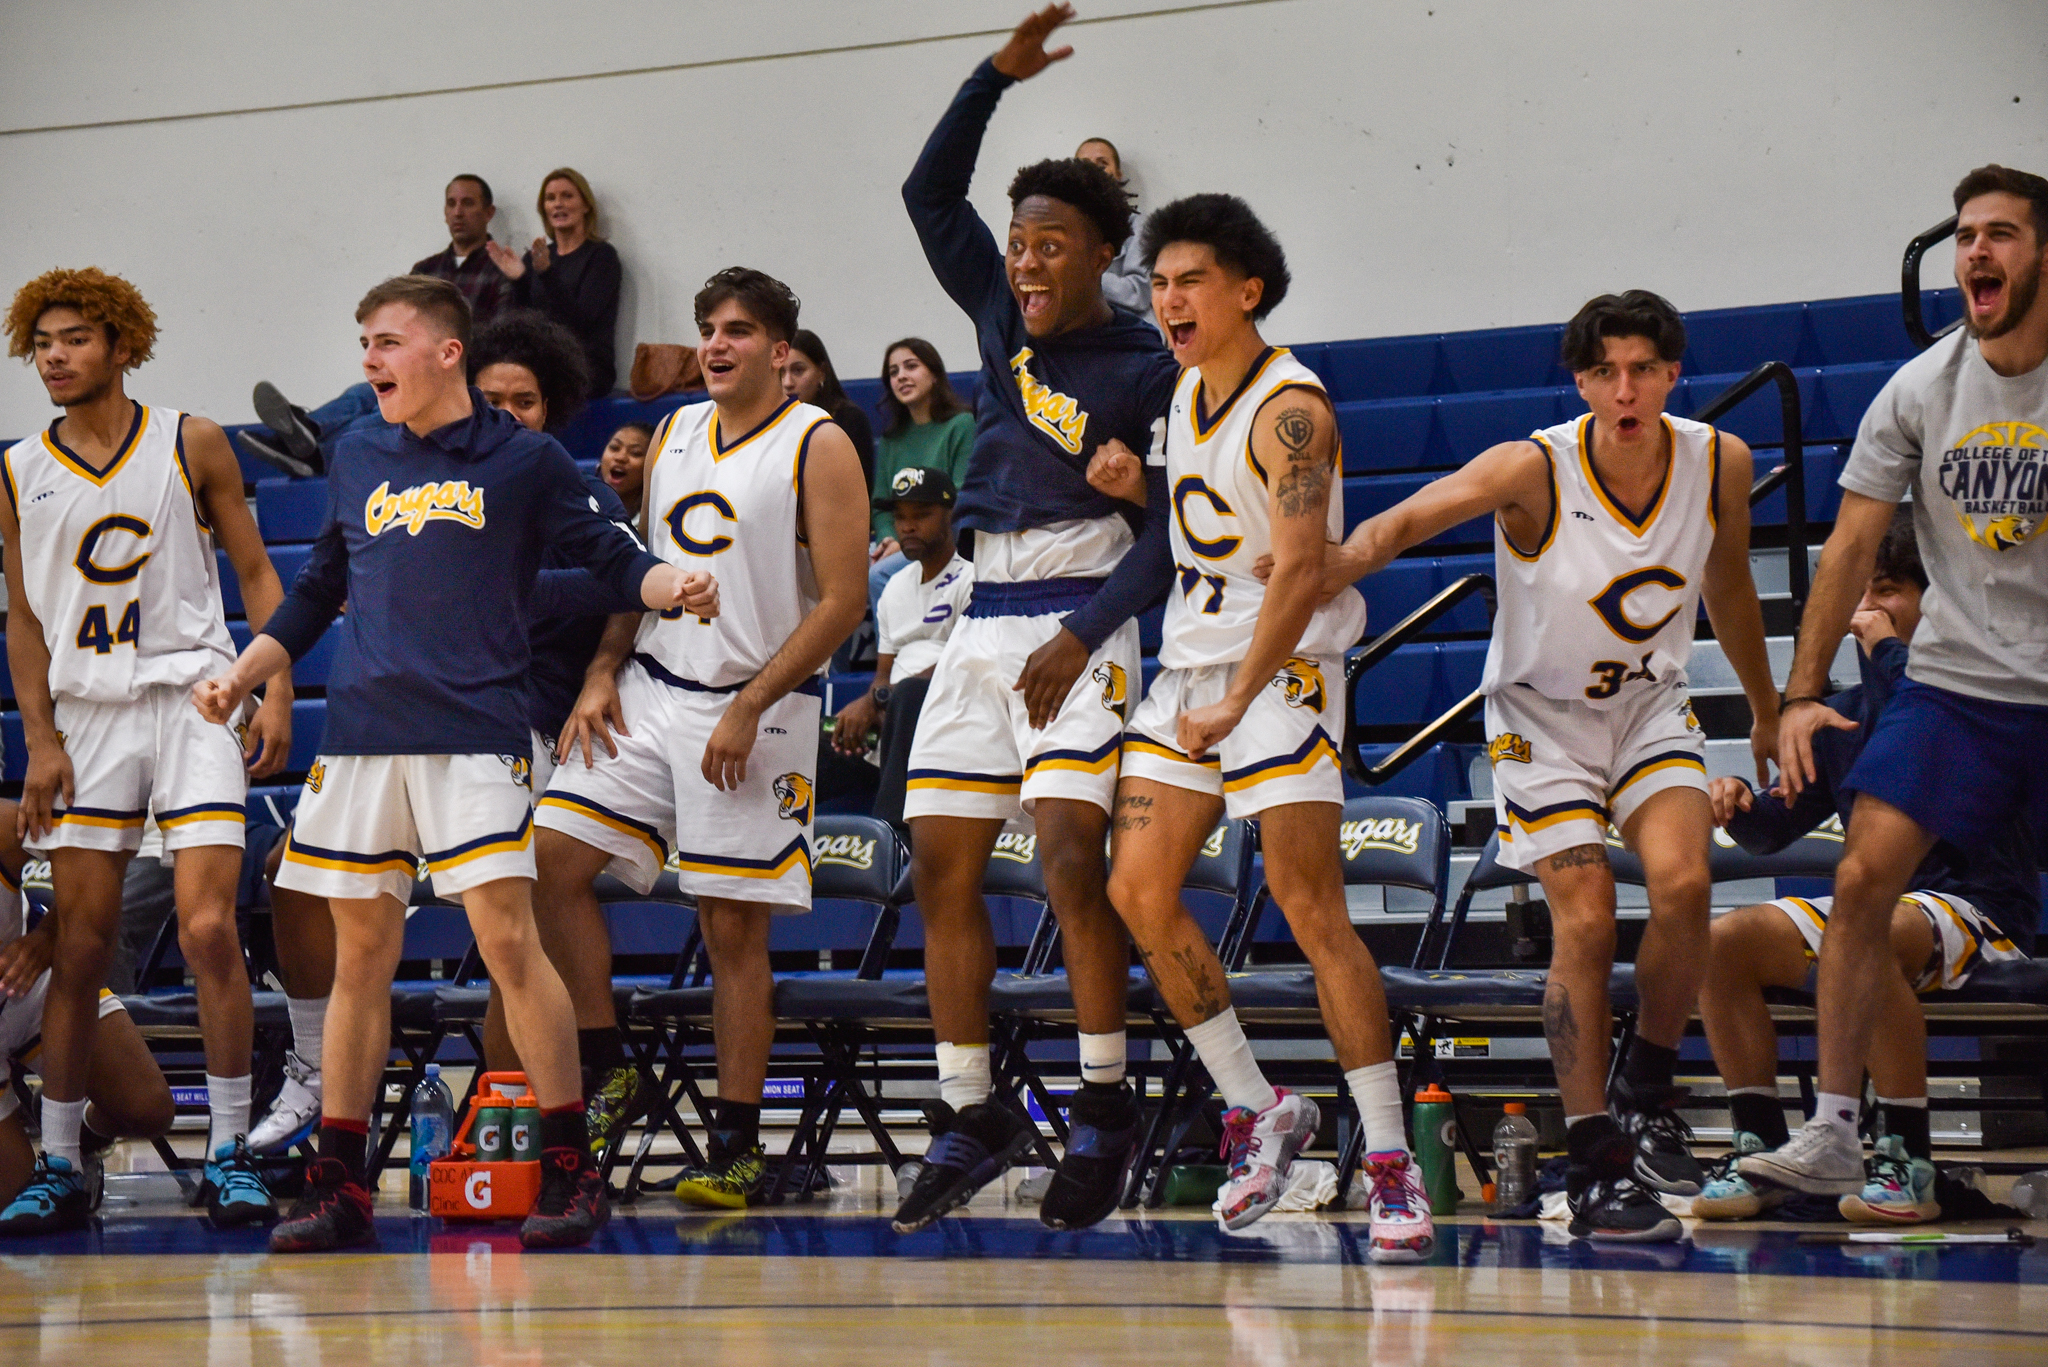 College of the Canyons men's basketball vs. Cuyamaca College on Nov. 4, 2022.